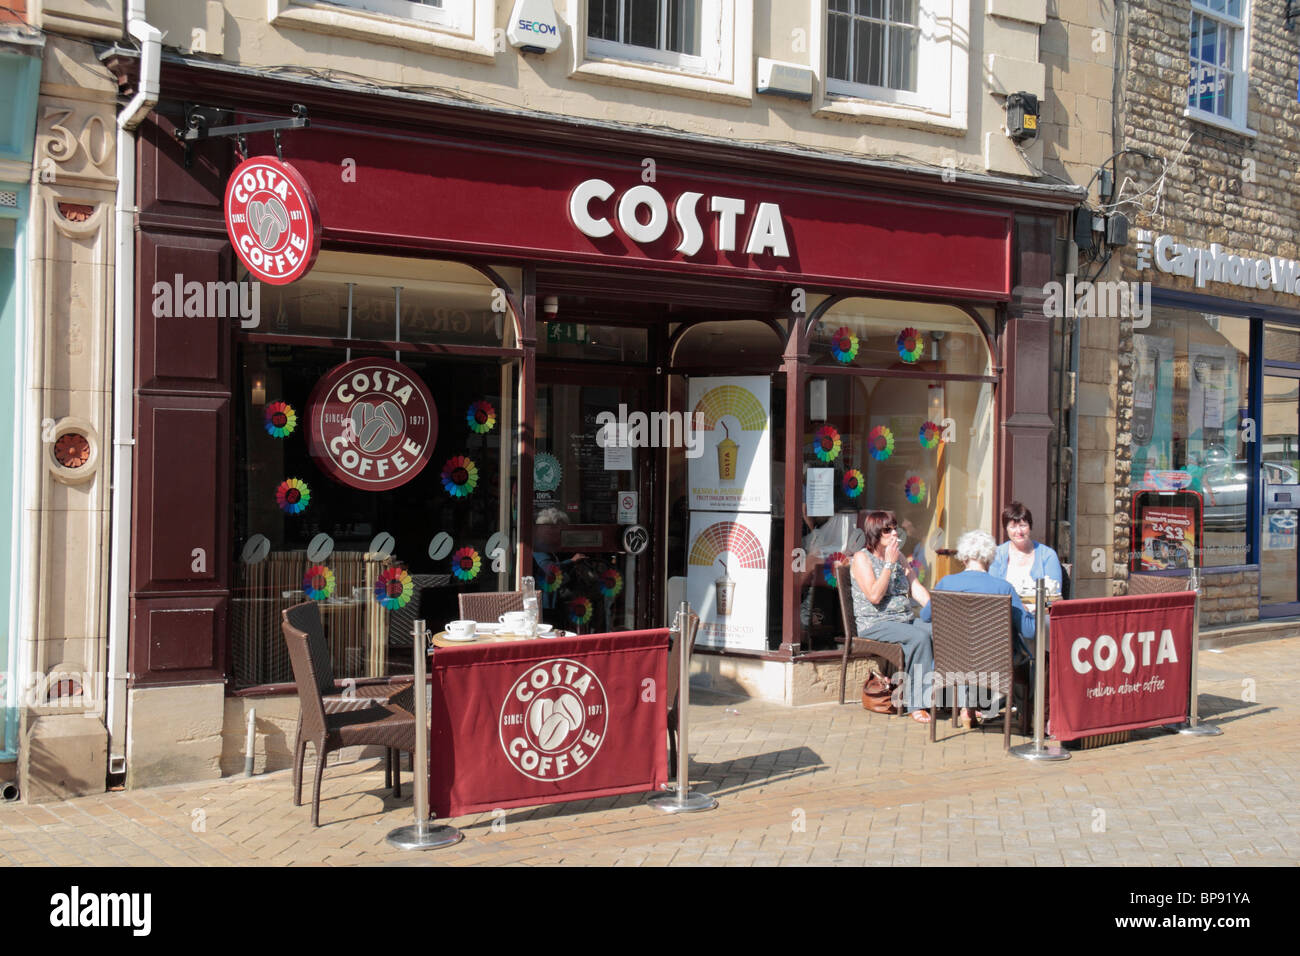 The shop front to a Costa Coffee restaurant/cafe in the High Street, Stamford, Lincolnshire, UK Stock Photo